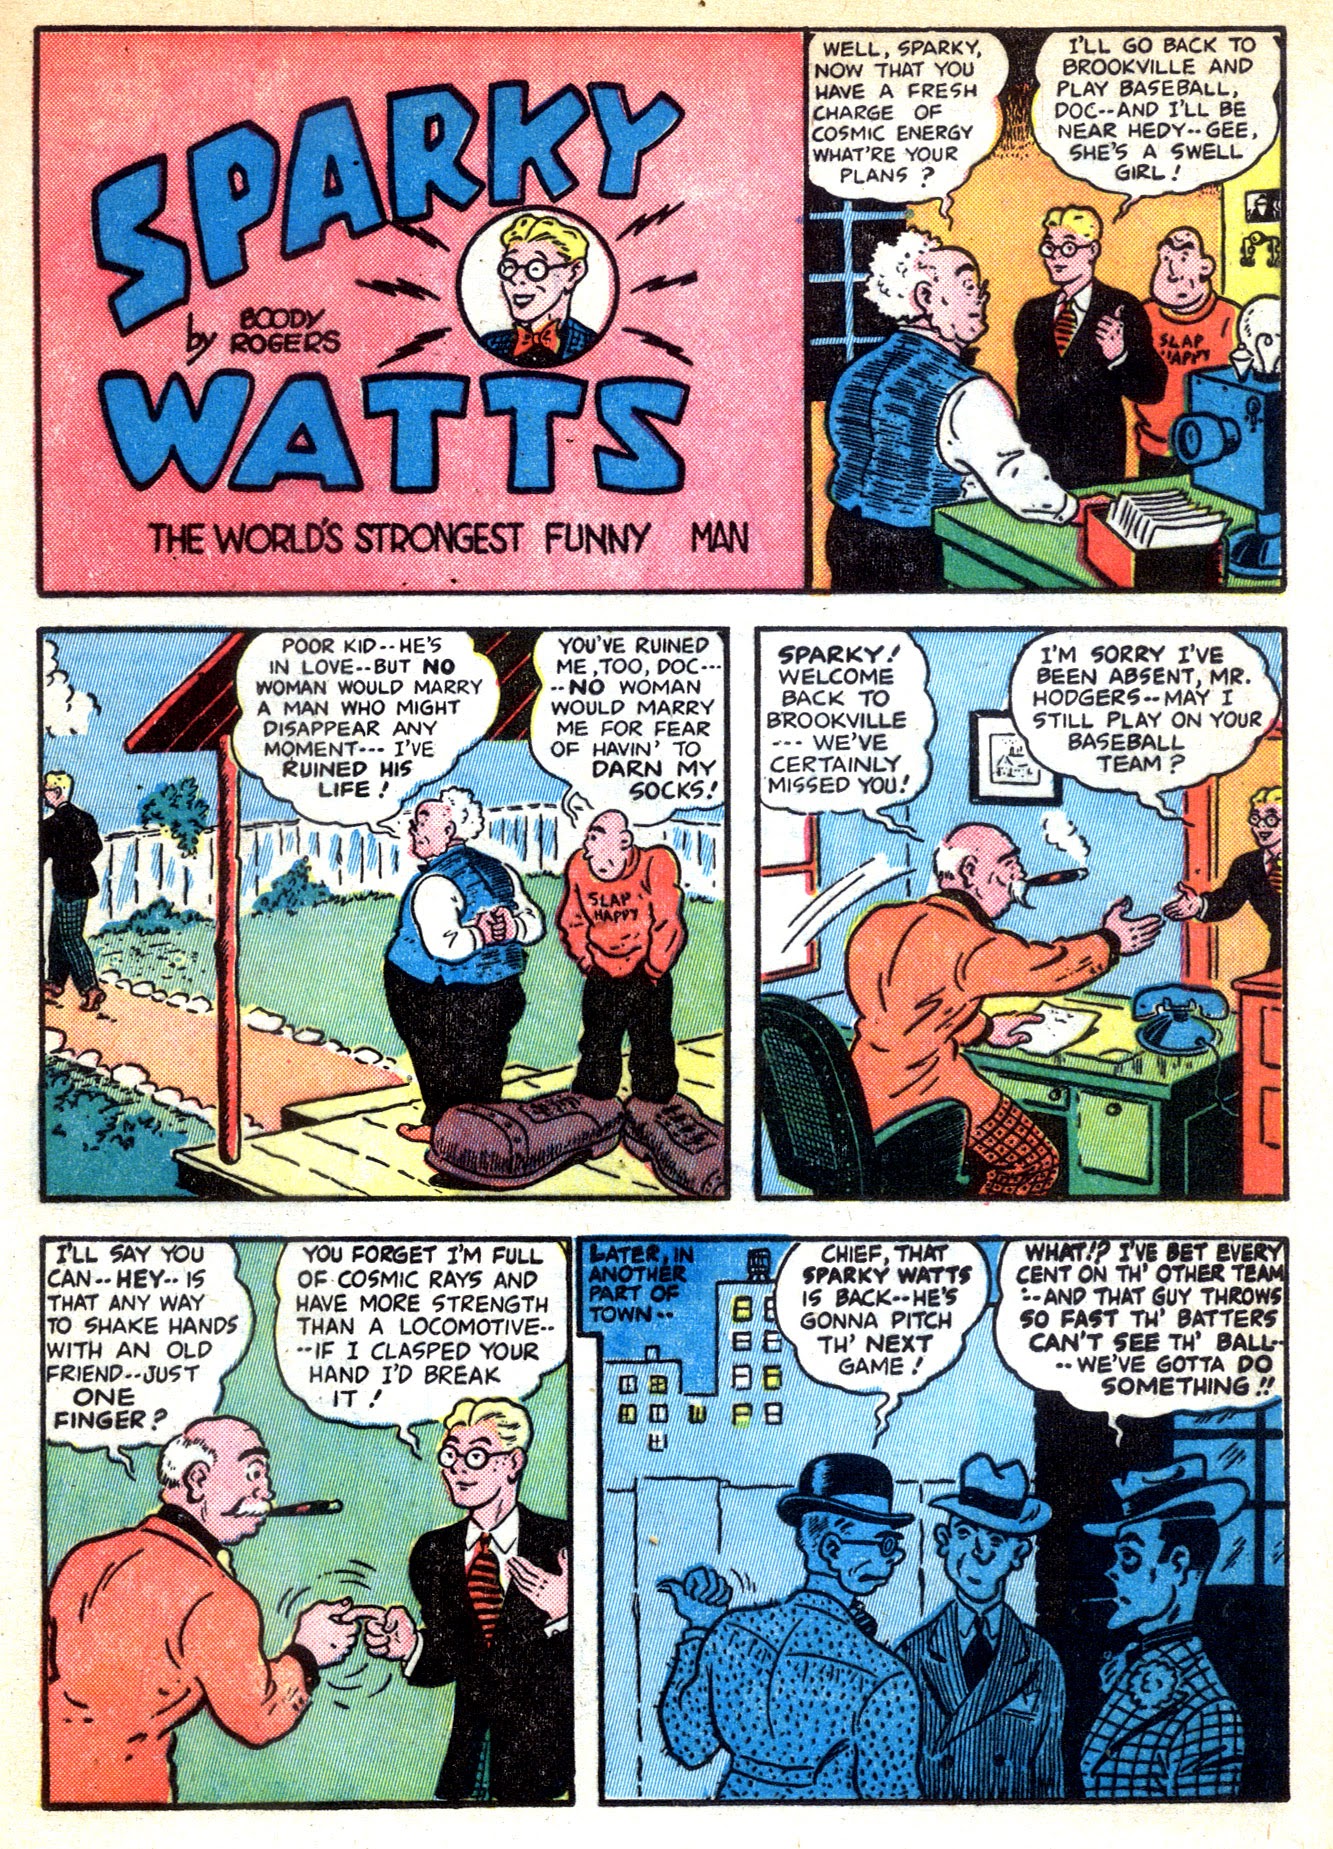 Read online Sparky Watts comic -  Issue #4 - 37